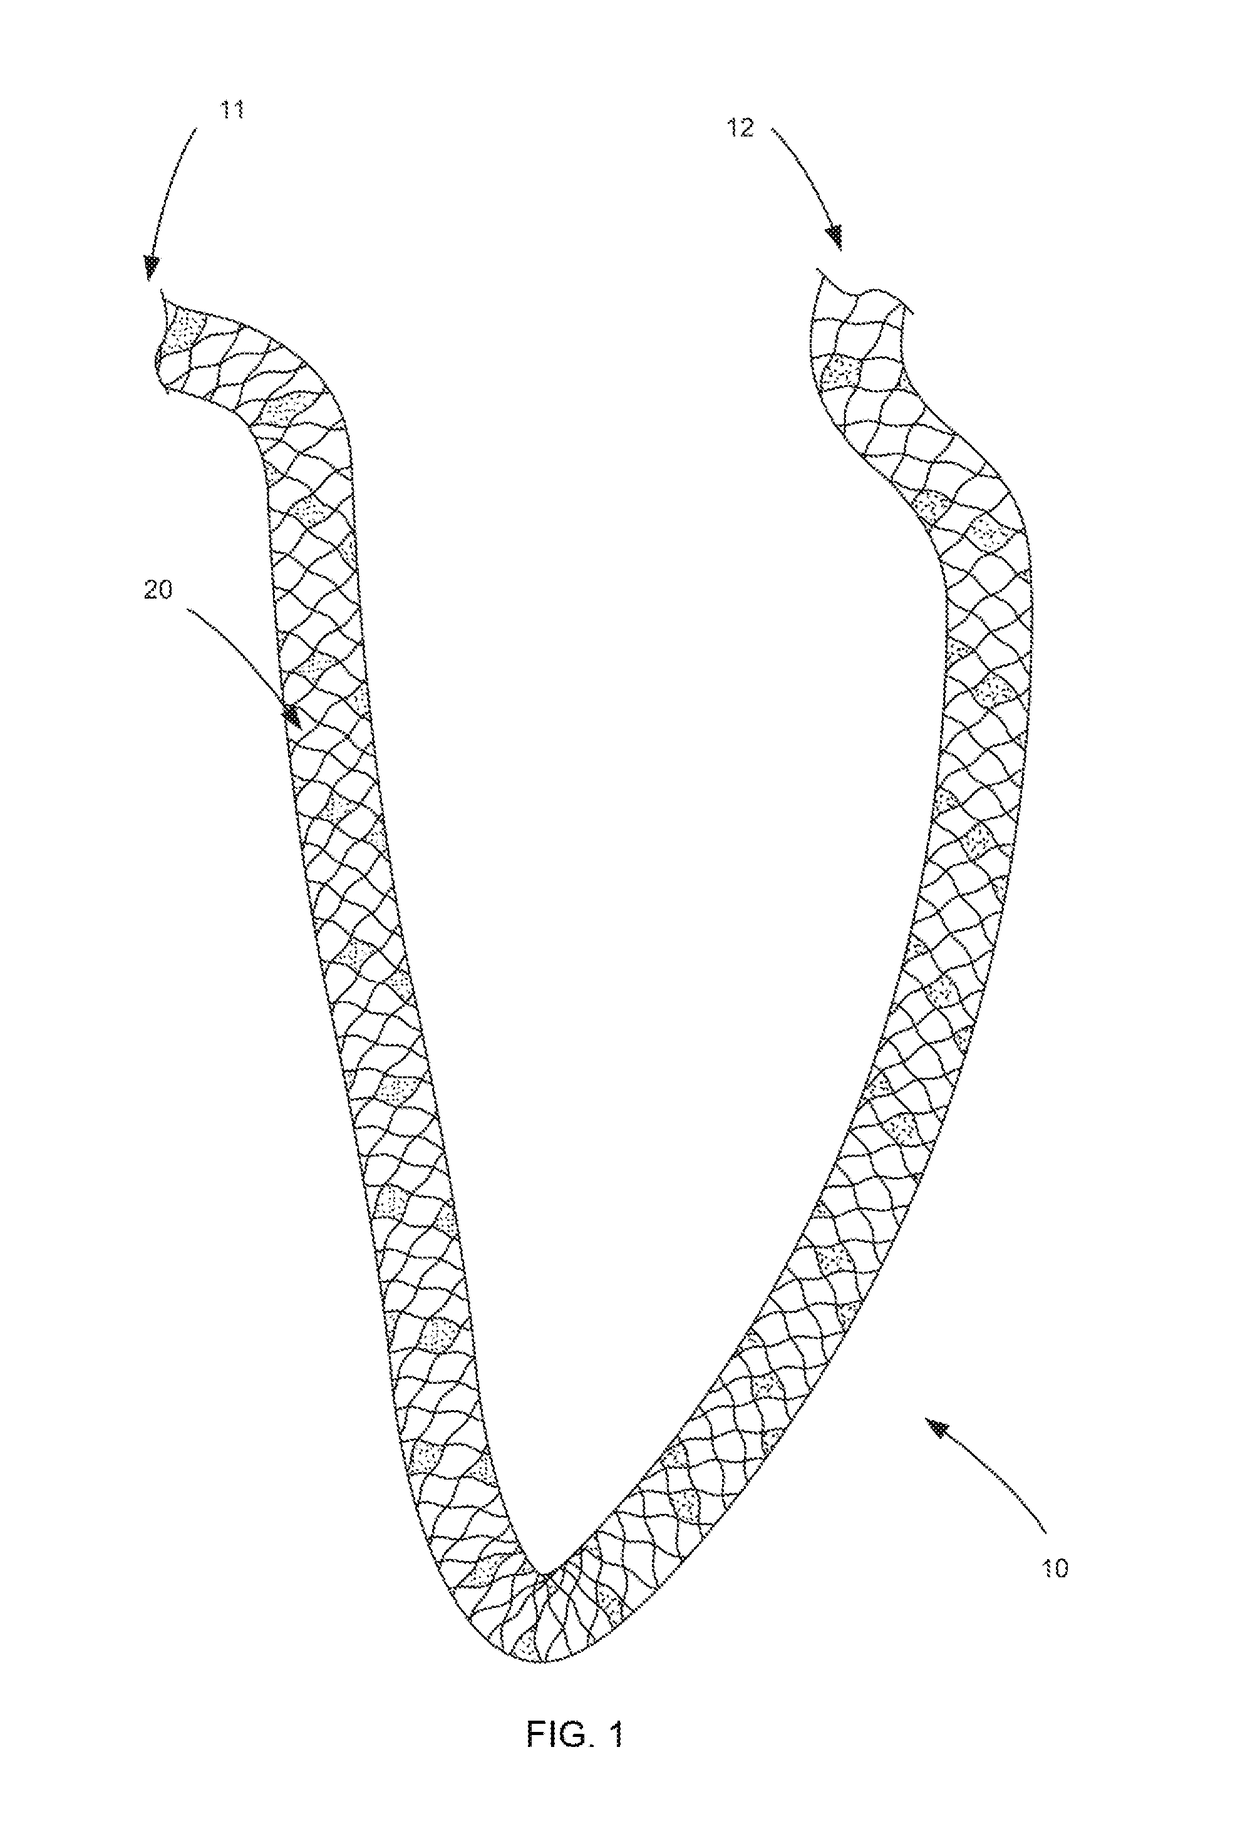 Braided filament with particularized strand compositions and methods of manufacturing and using same